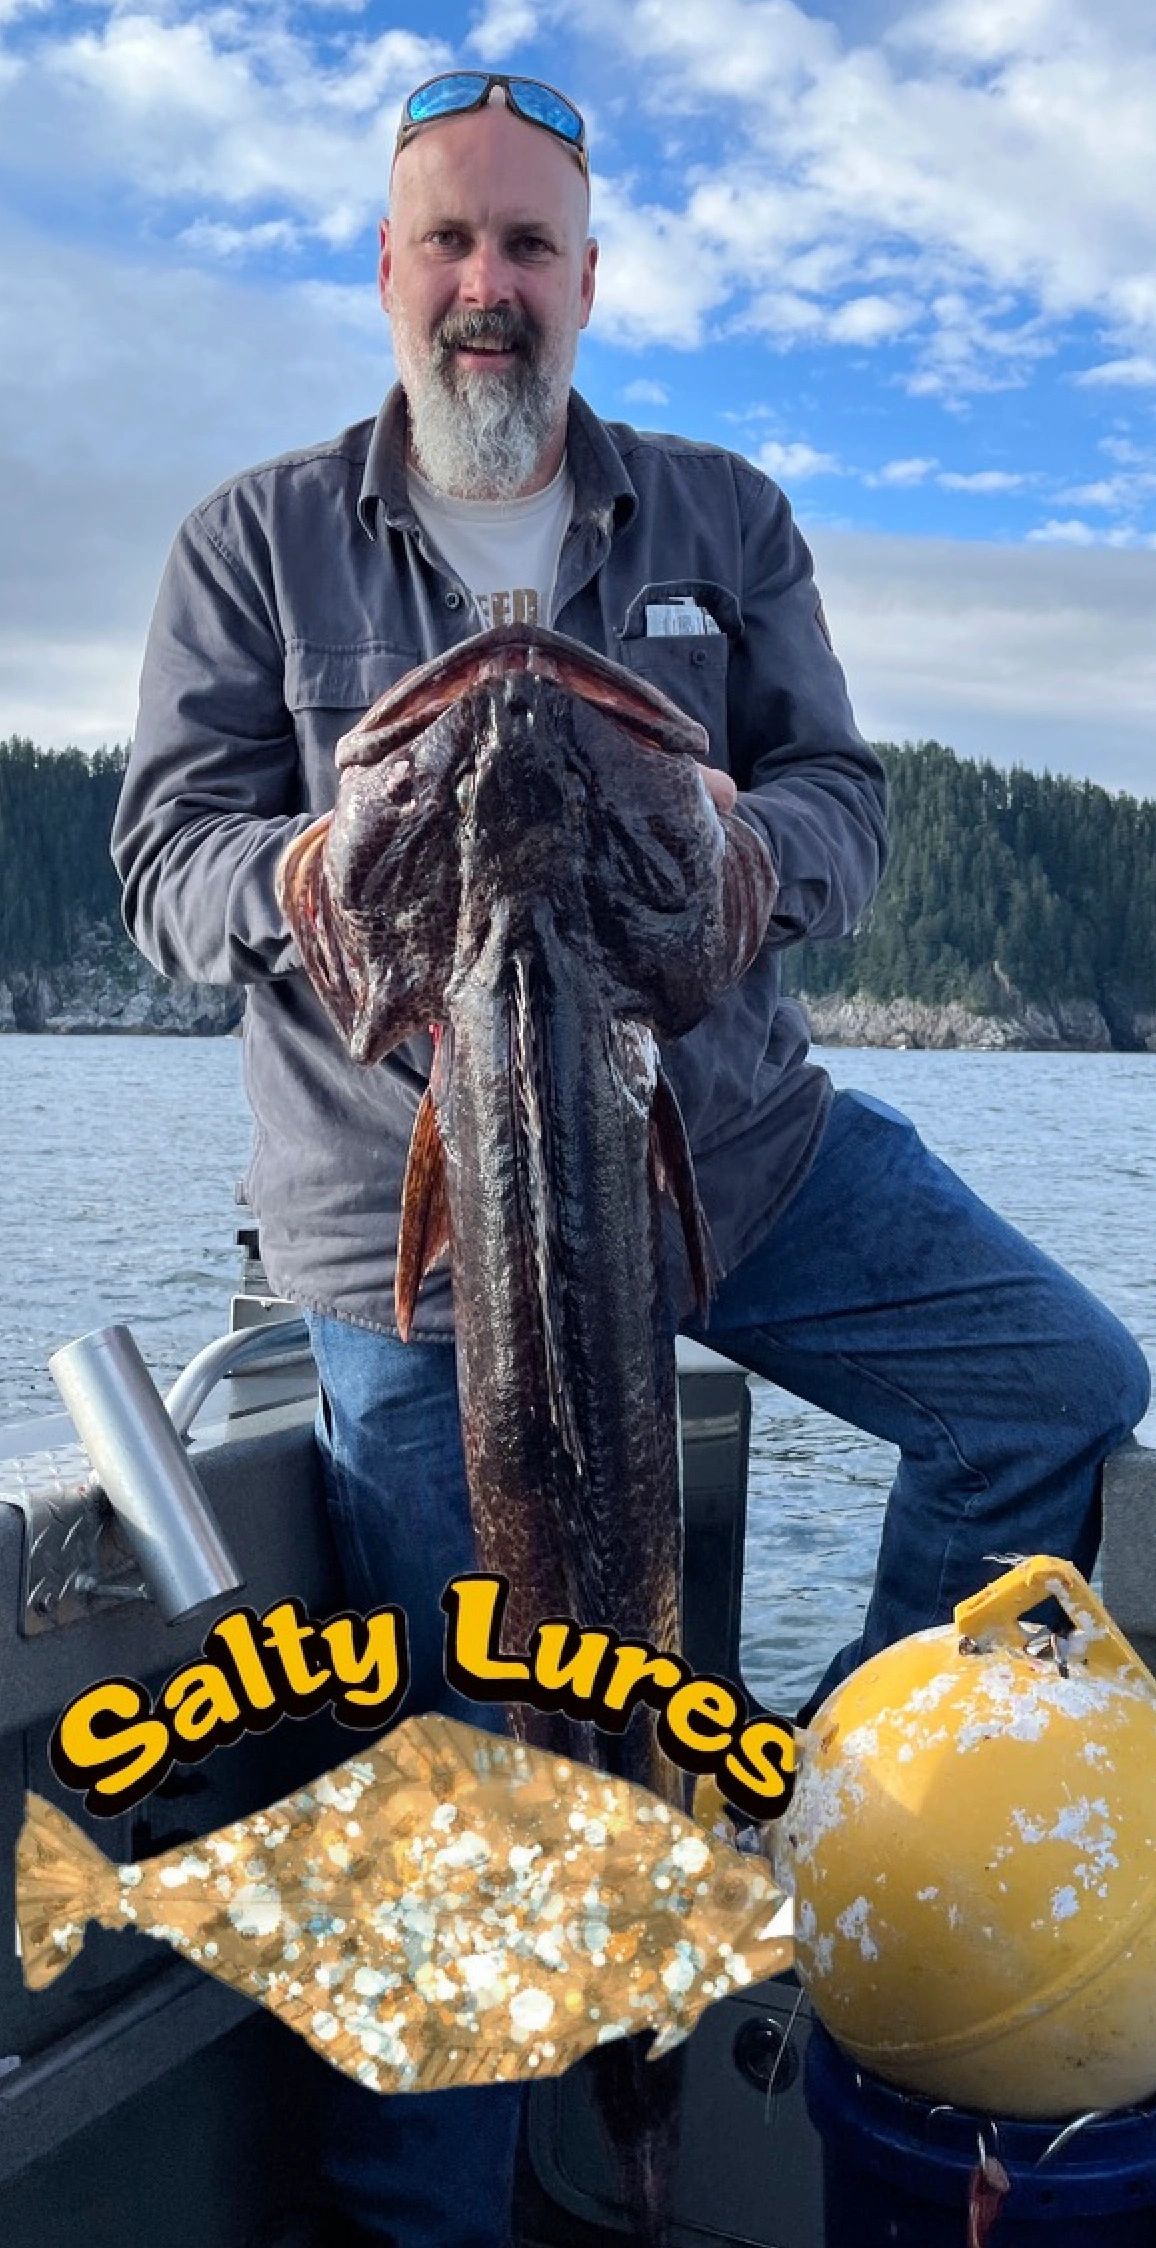 Salty Lures - Saltwater Fishing Lures, Halibut Lures, Ling Cod